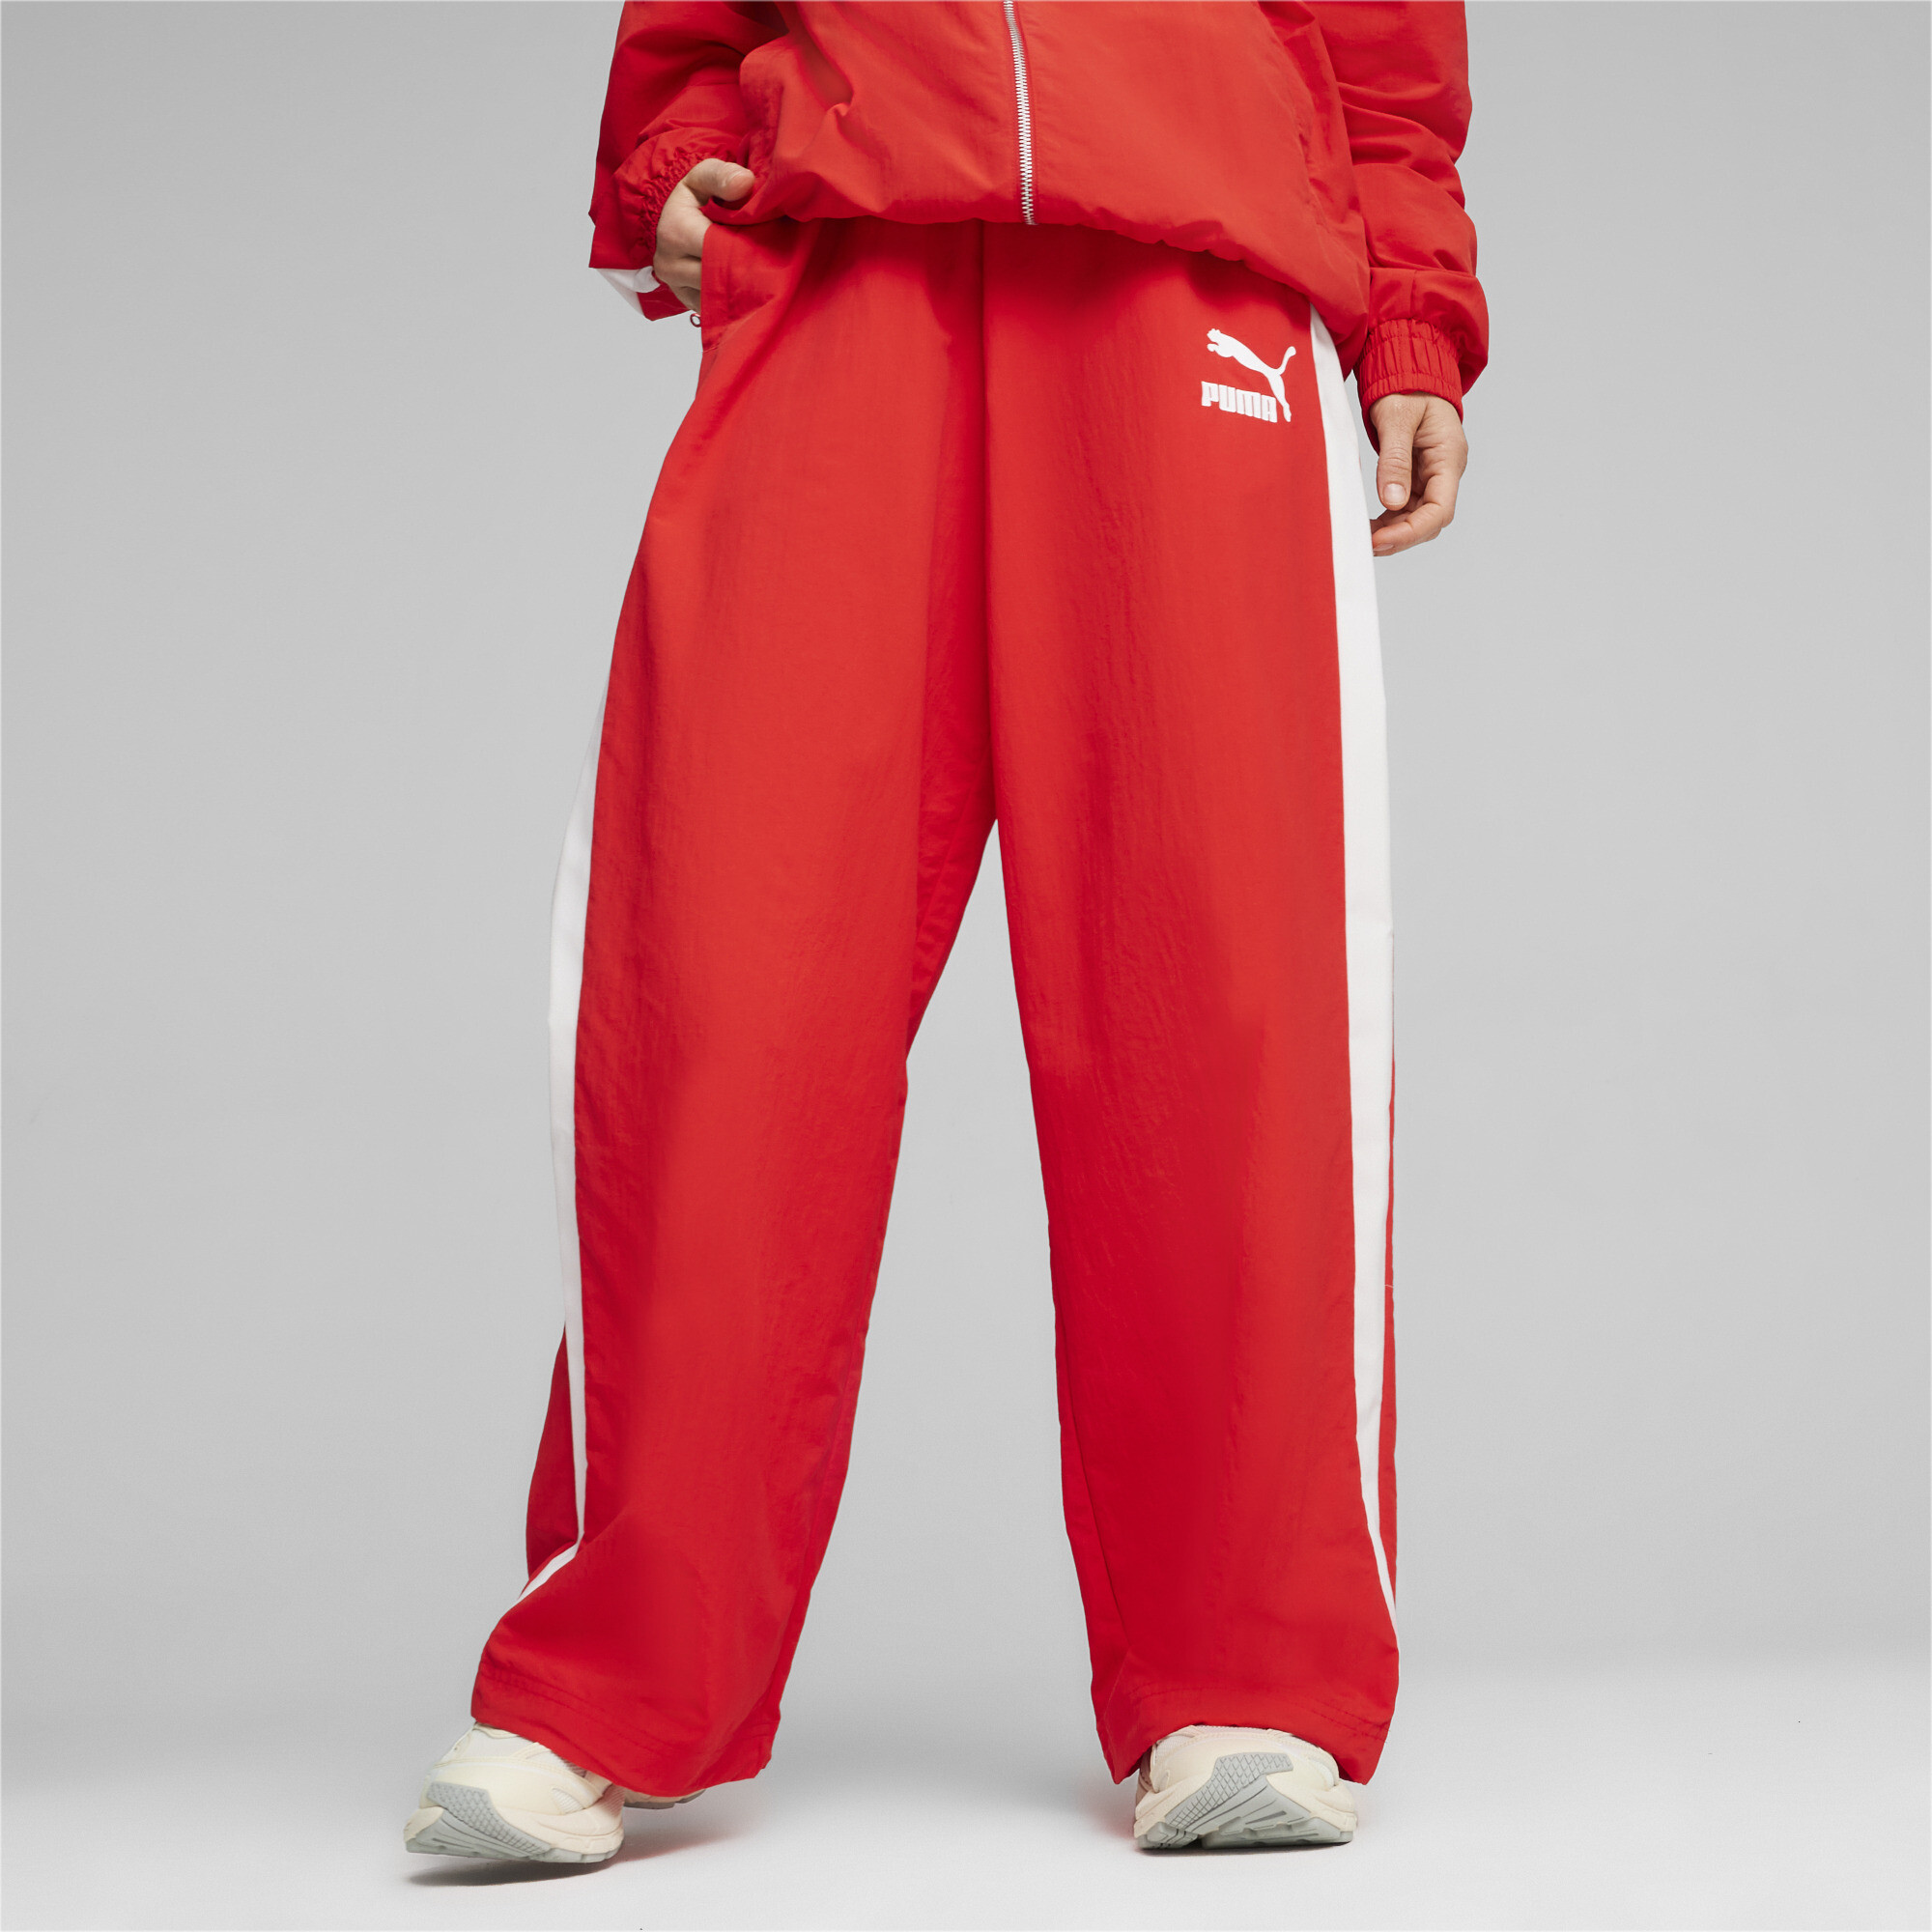 Puma T7's Oversized Track Pants, Red, Size XL, Women